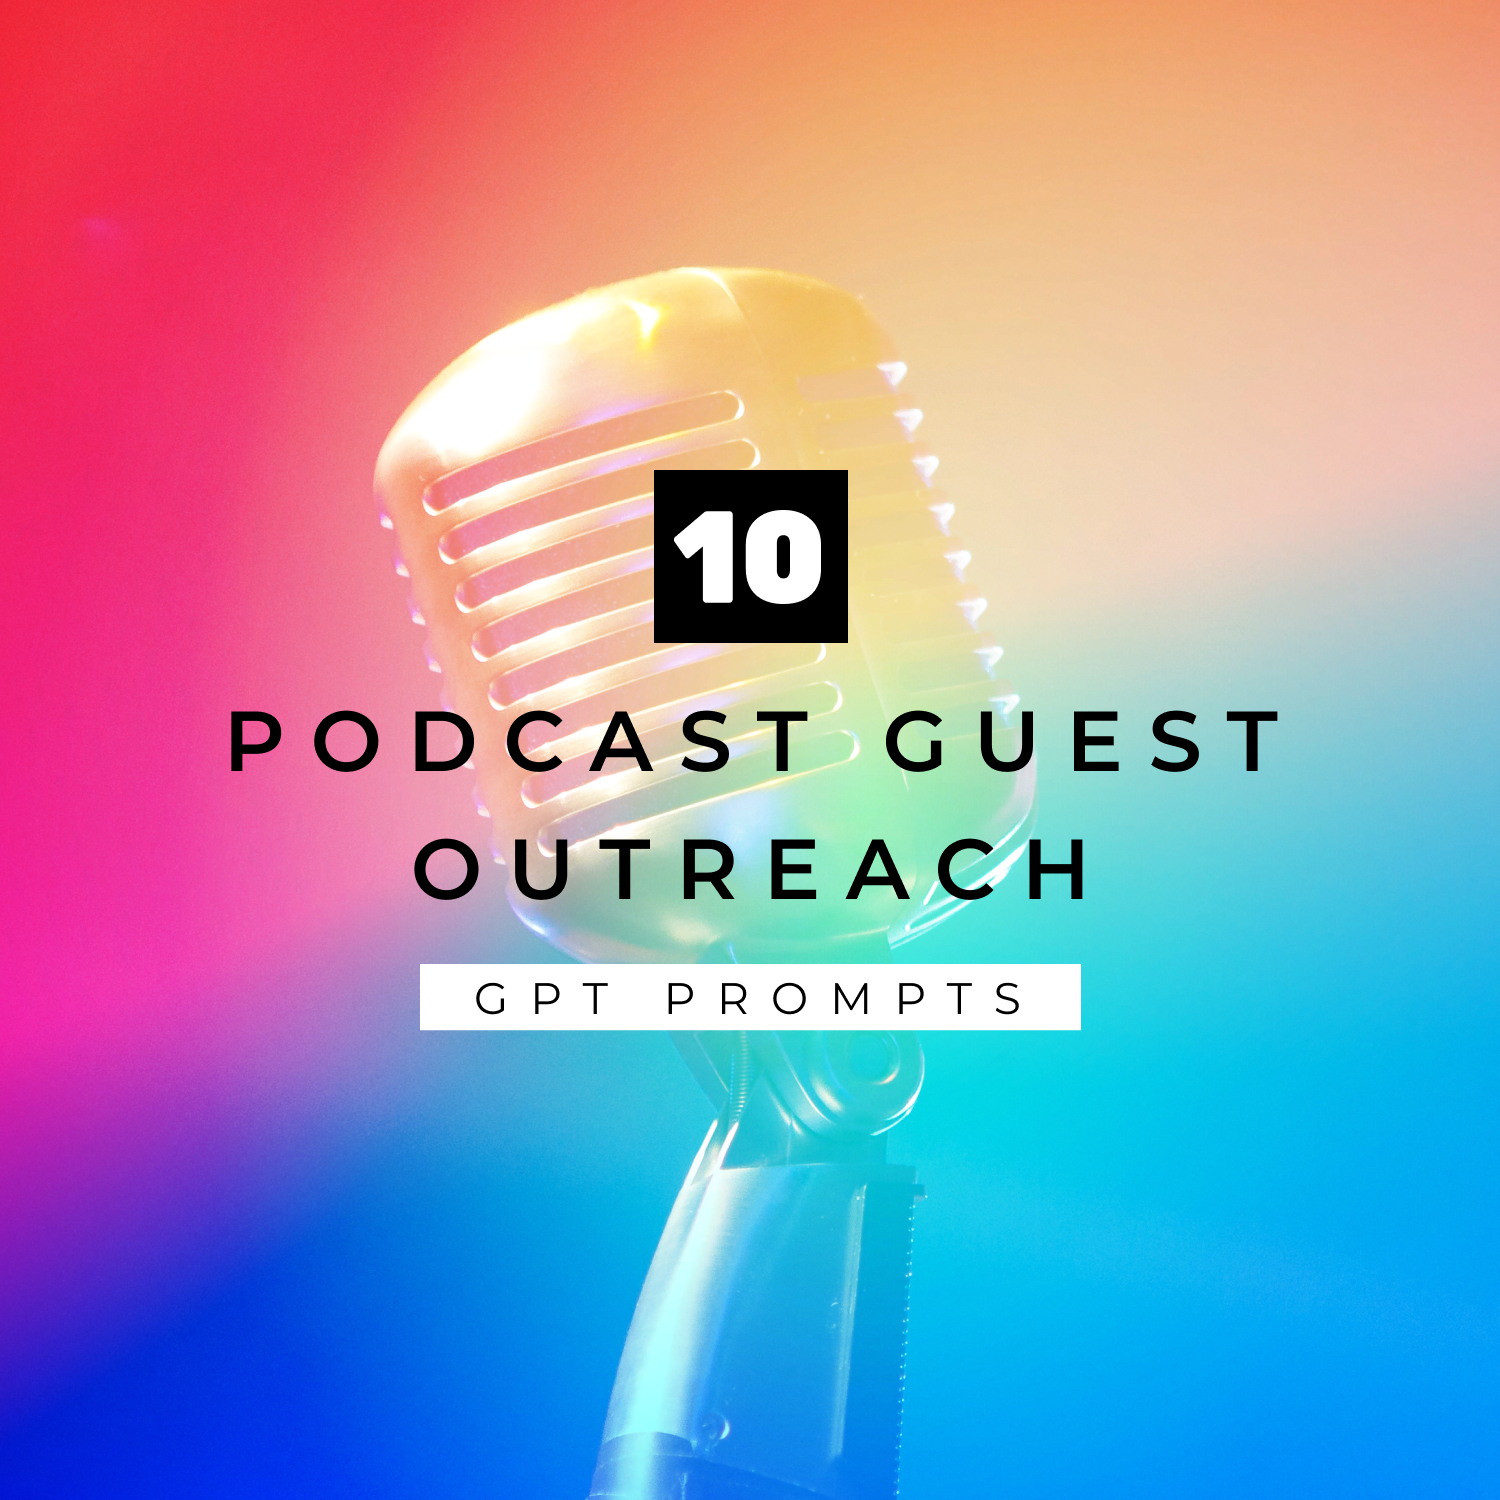 10 podcast guest outreach 377